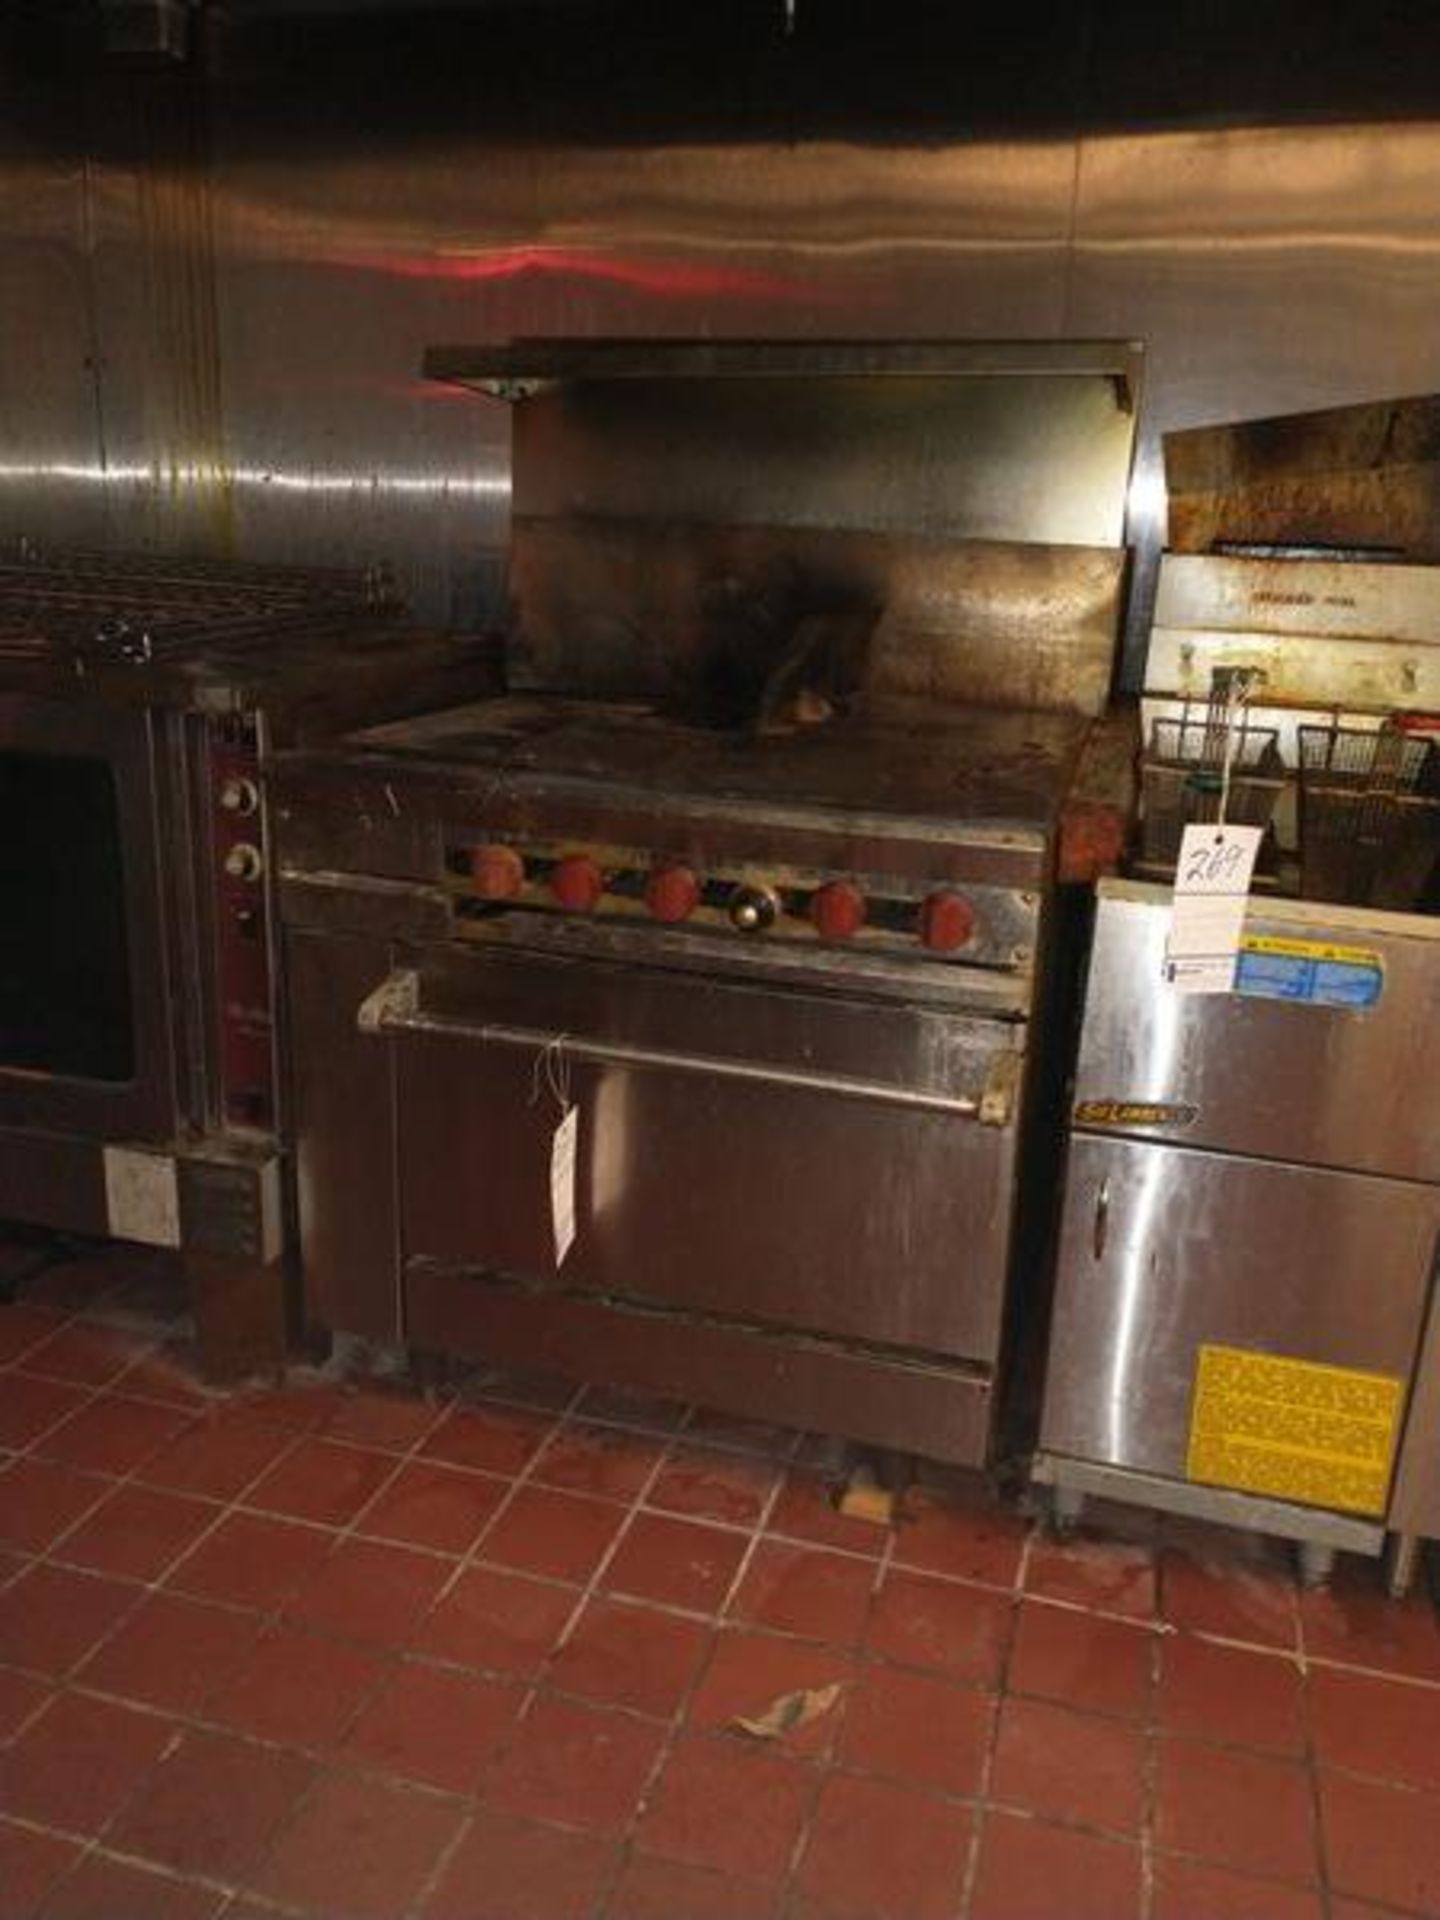 4 BURNER STOVE WITH GRIDDLE AND OVEN